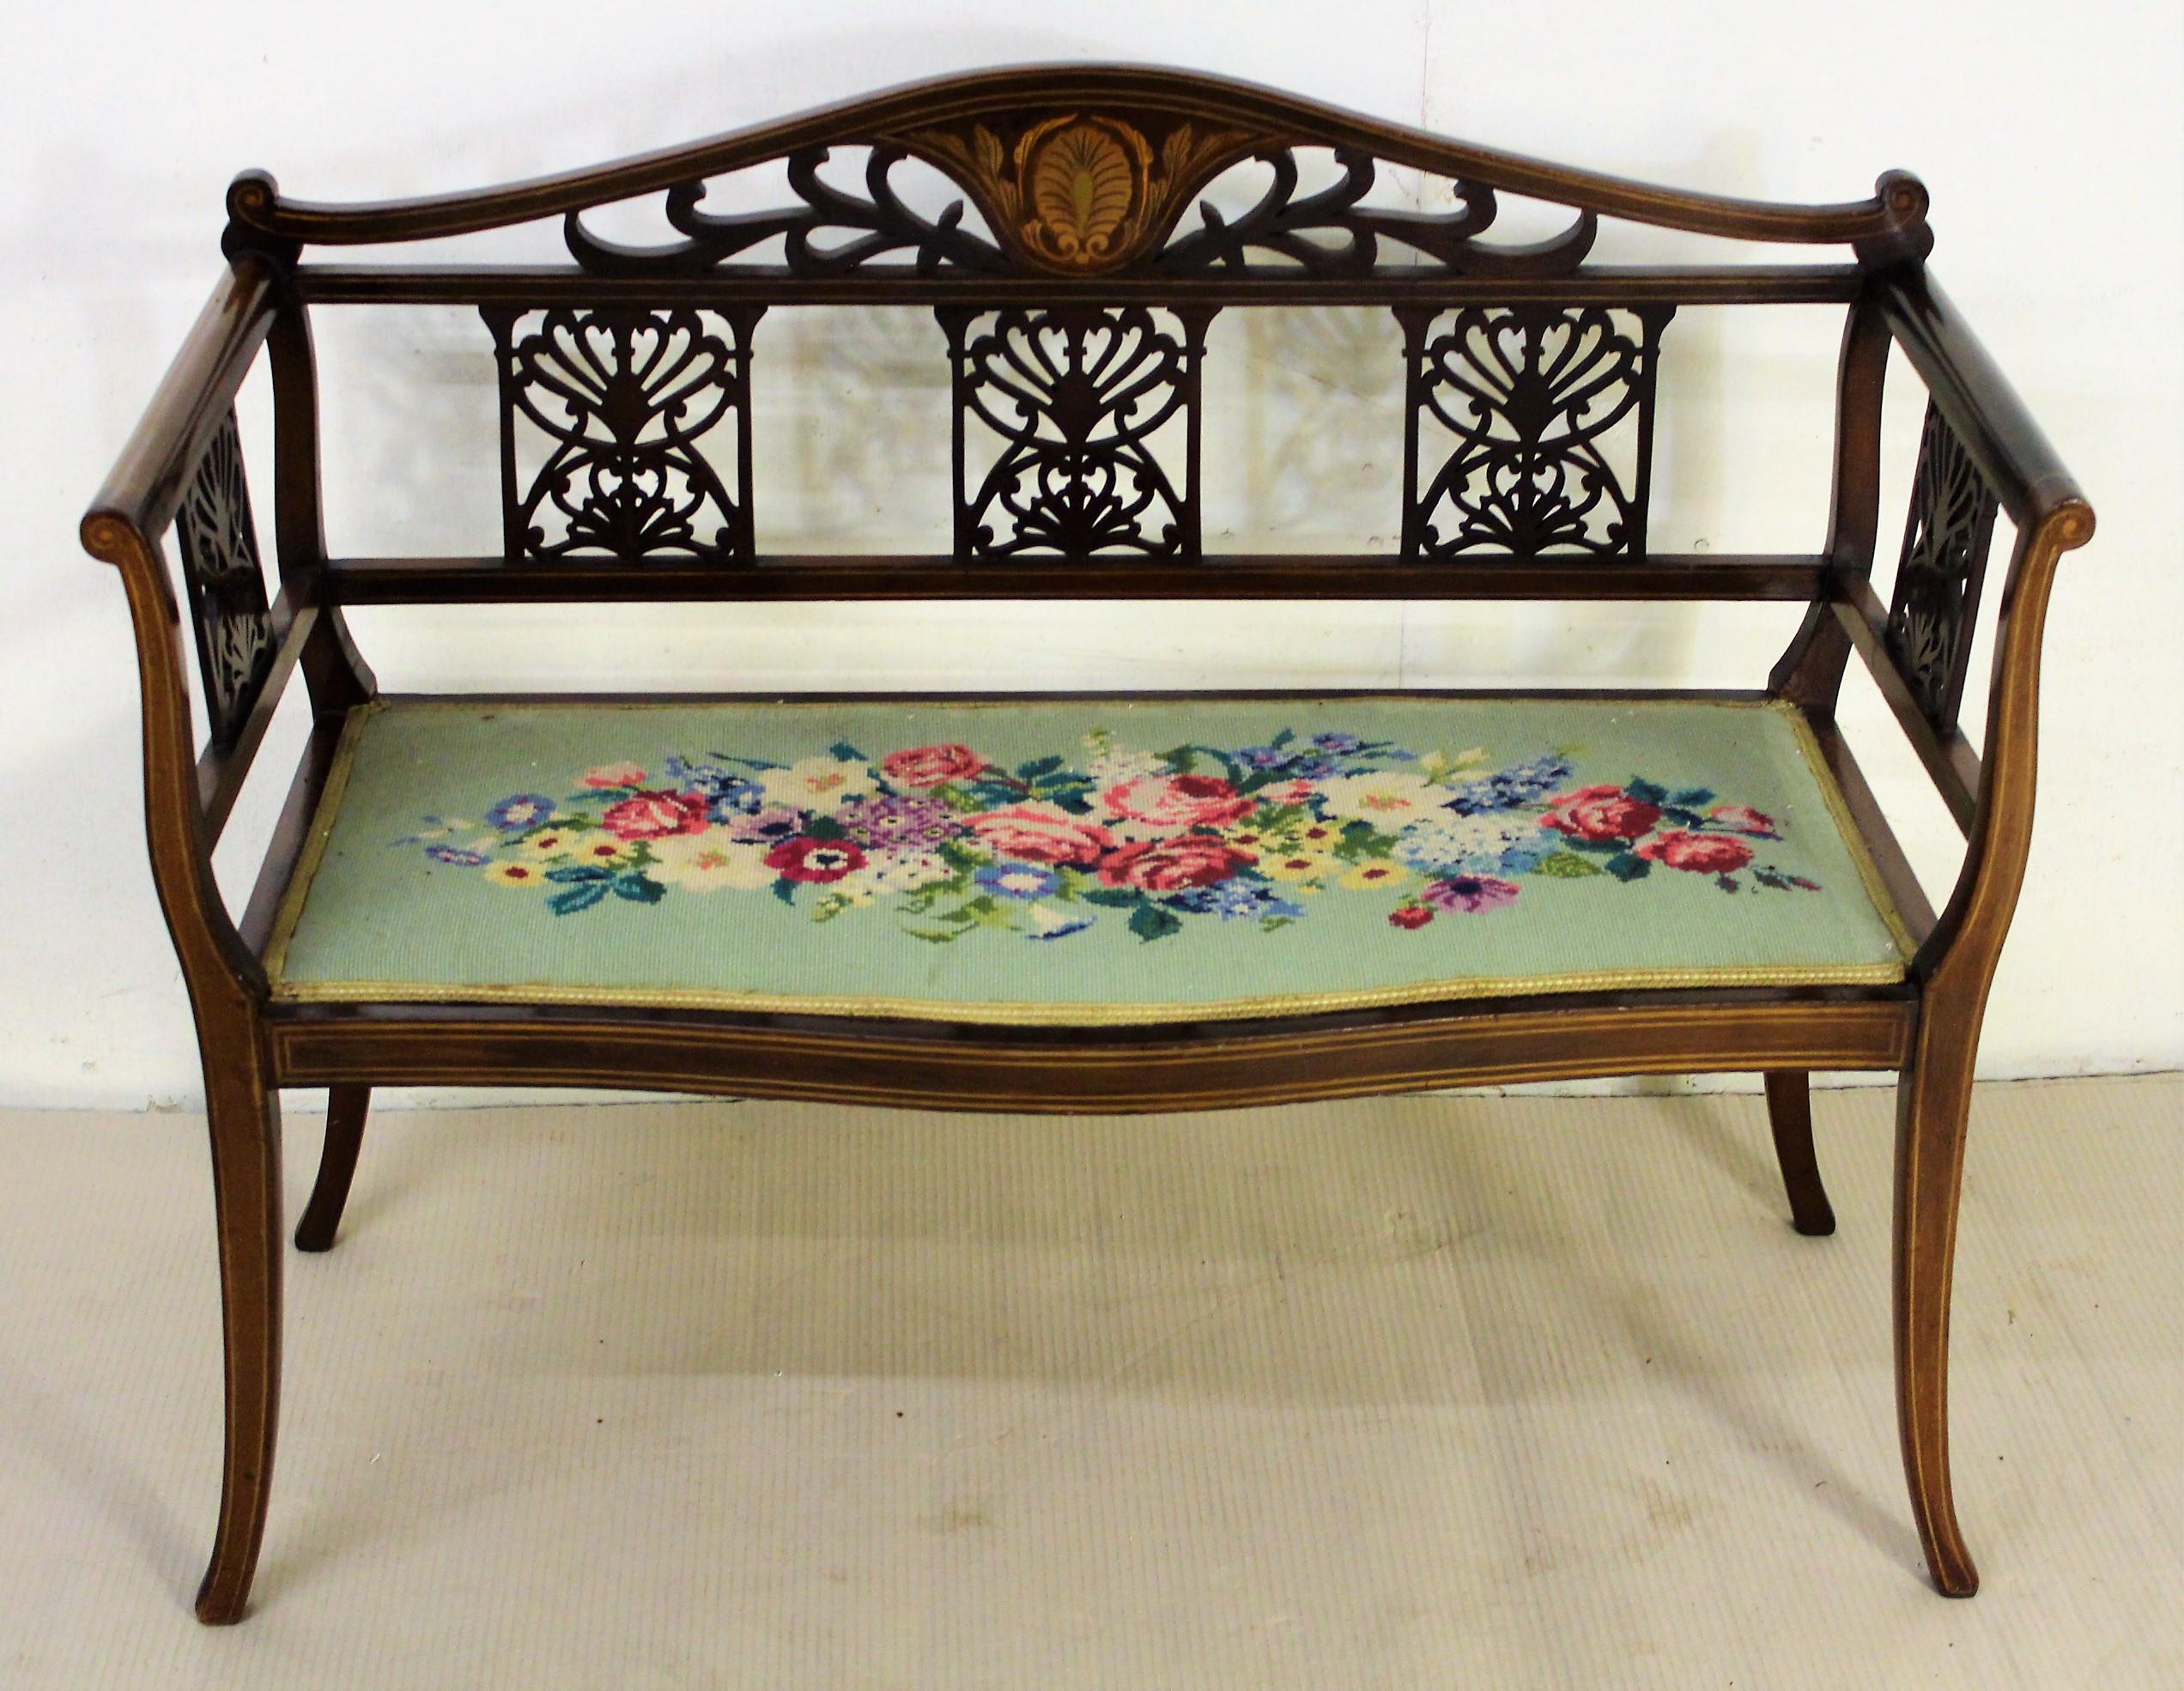 A pretty and refined inlaid mahogany settee, or bench, from the Edwardian period. Well constructed in solid mahogany and decorated with inlaid boxwood stringing throughout. With a central inlaid motif to the back and open fretwork panels to the back